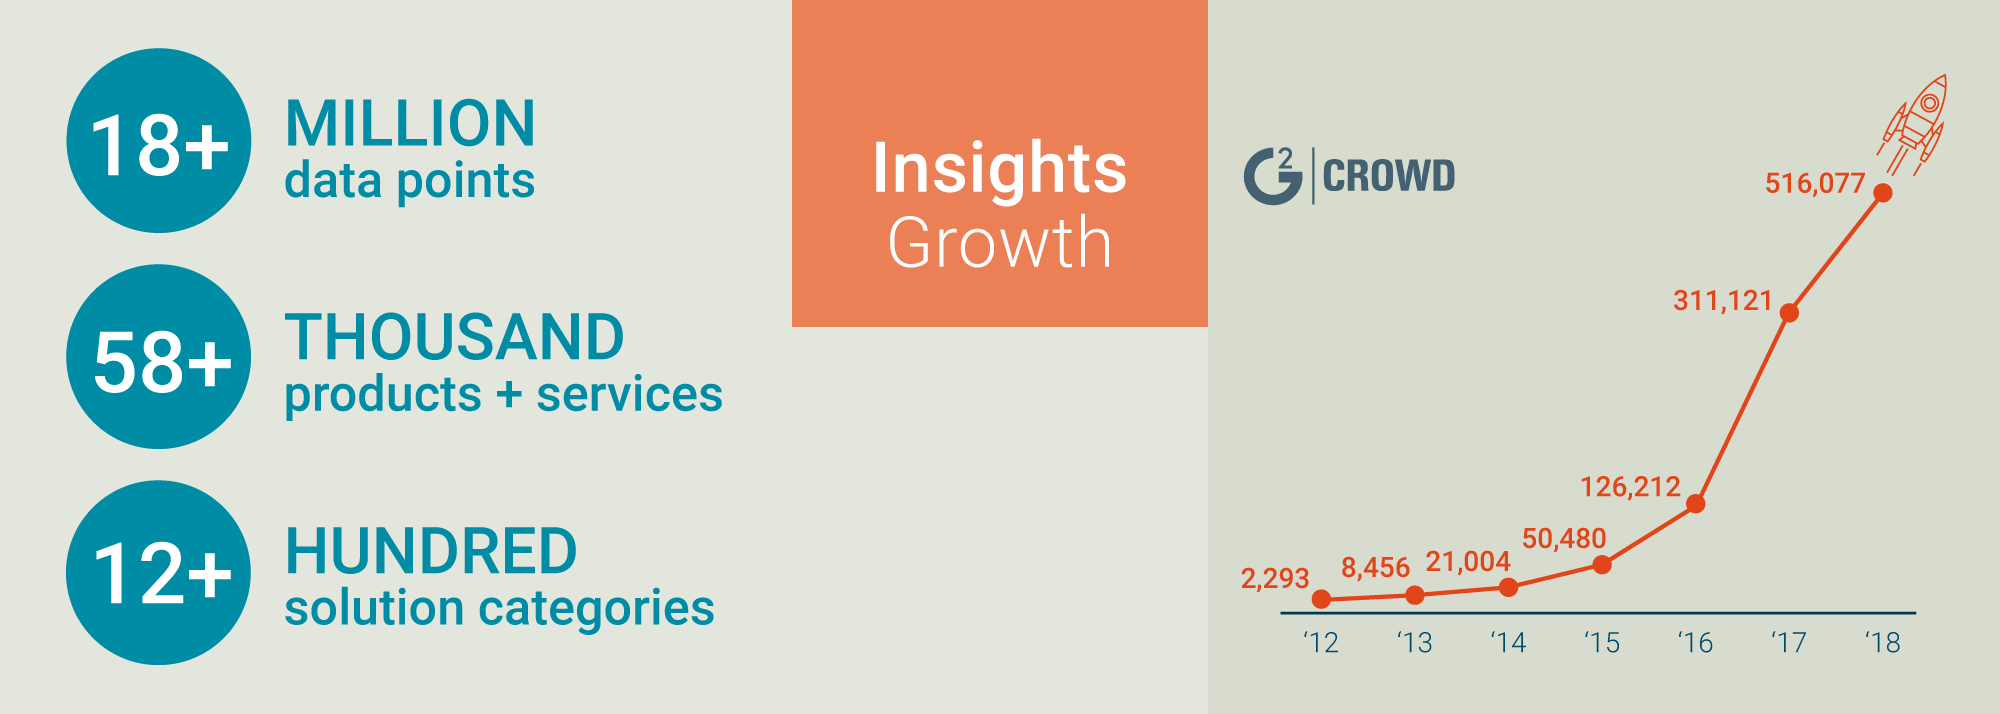 G2 Crowd Series C reviews growth count by year